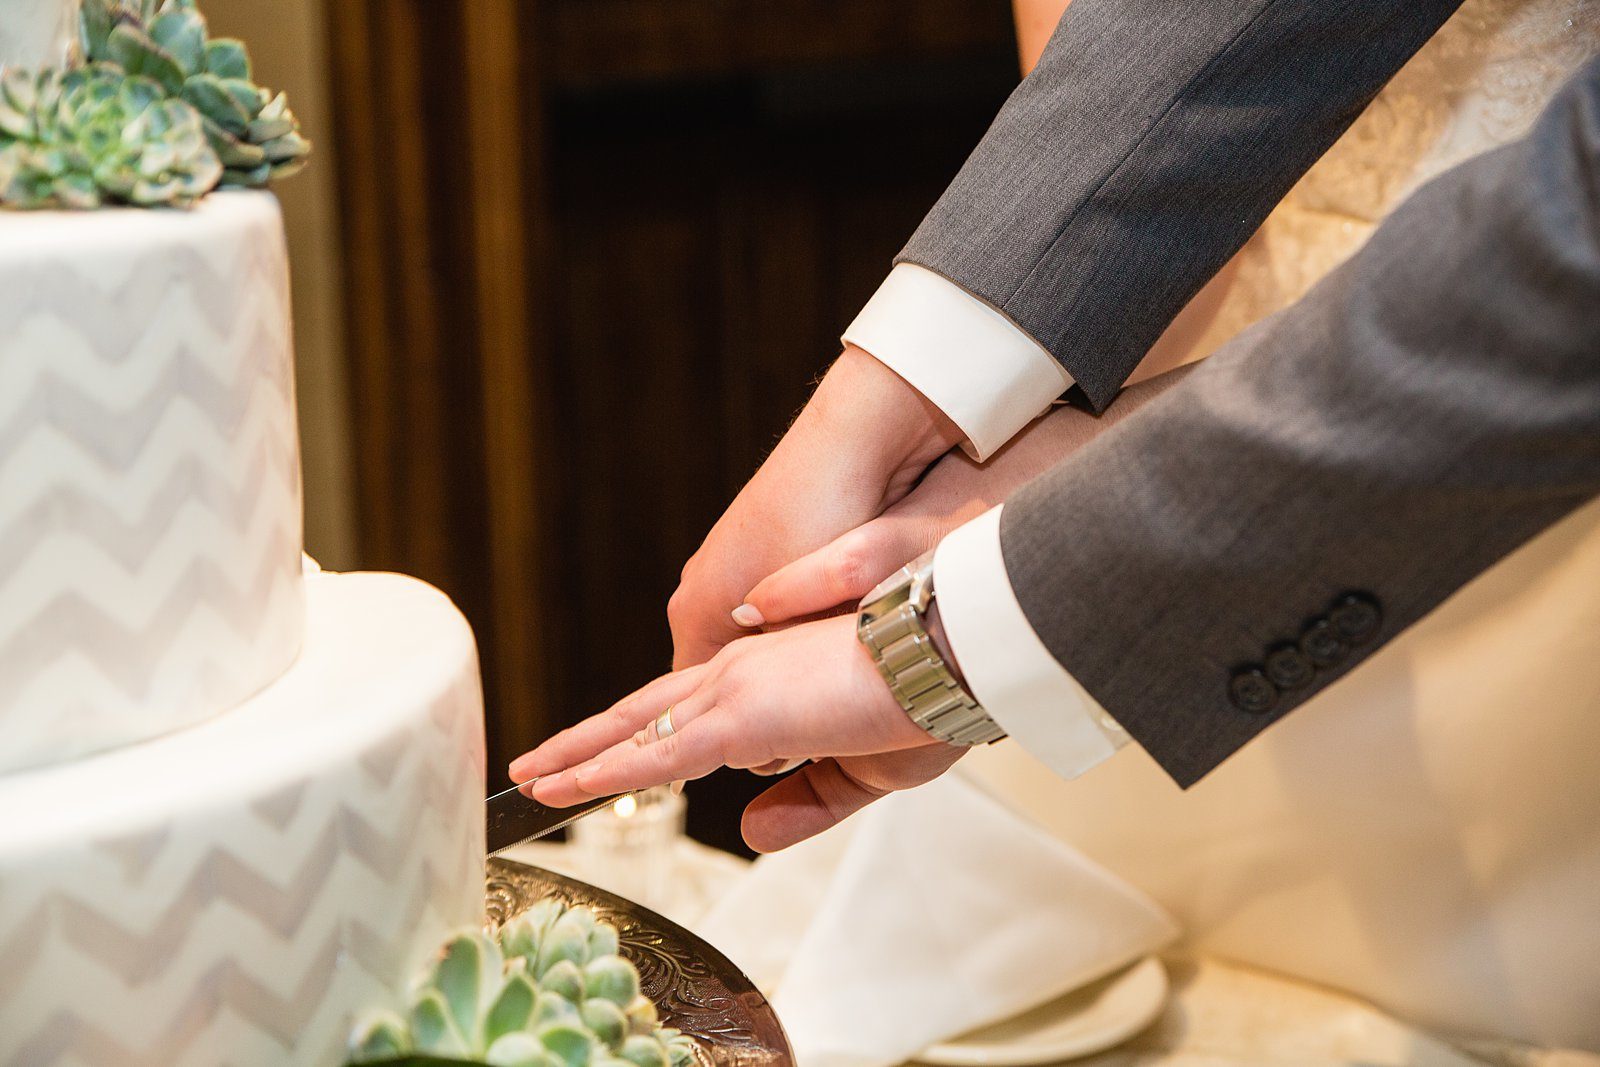 Bride and Groom cutting their wedding cake at their The Scottsdale Resort at McCormick Ranch wedding reception by Arizona wedding photographer PMA Photography.